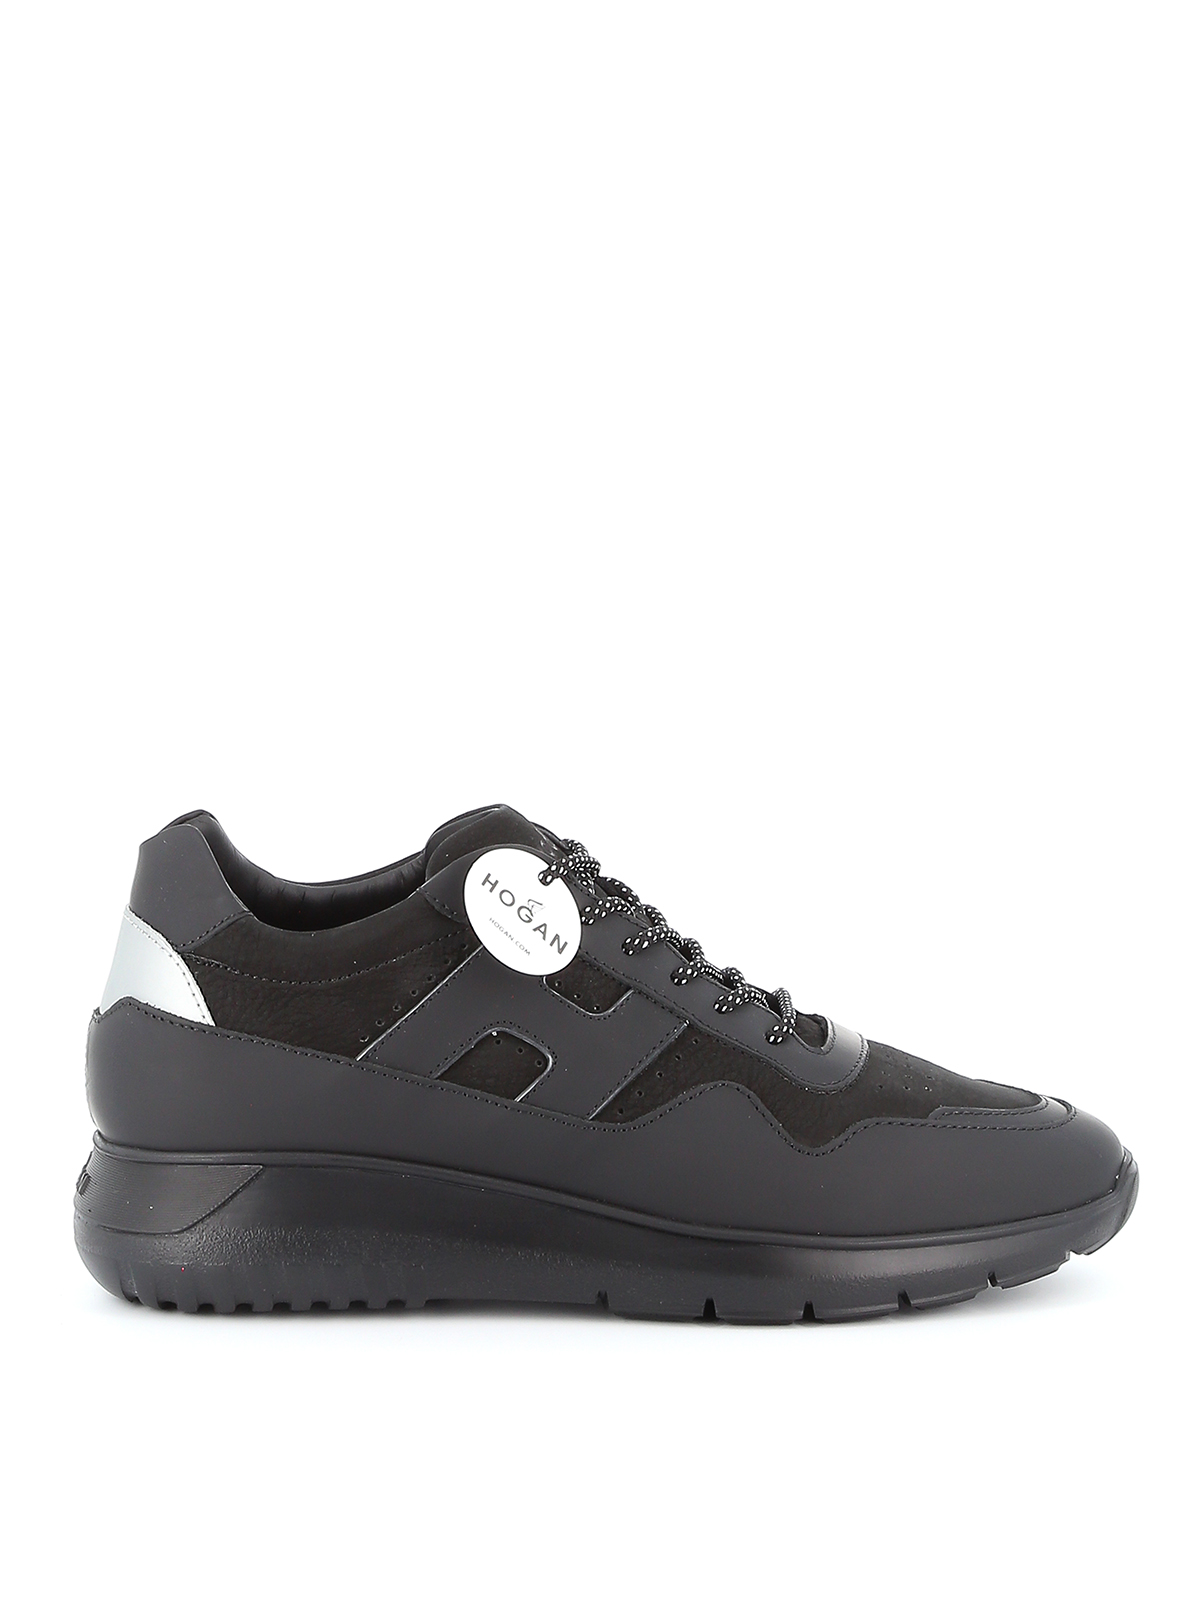 HOGAN INTERACTIVE LEATHER AND NUBUCK SNEAKERS